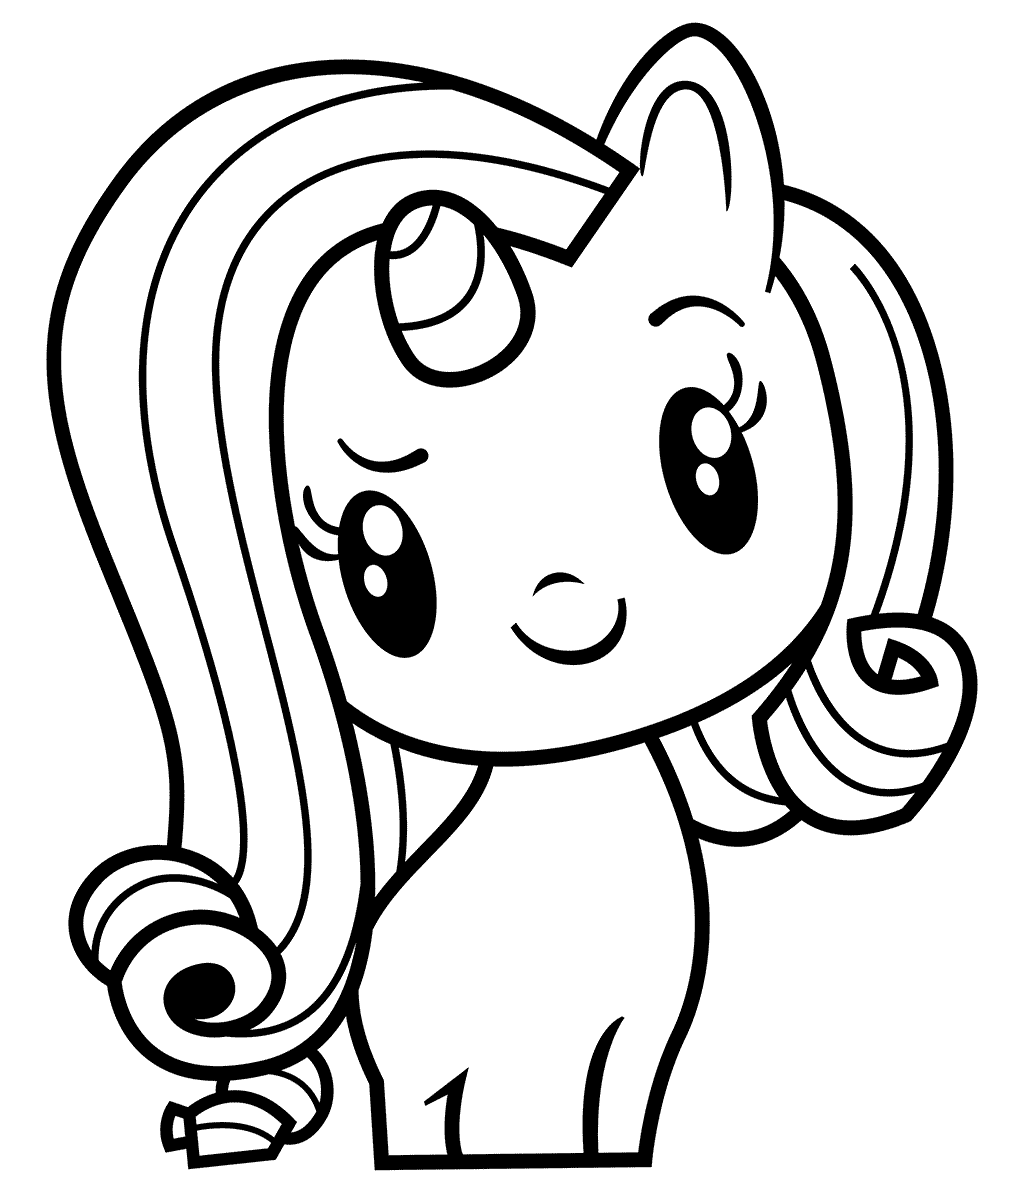 Rarity Coloring Pages - Best Coloring Pages For Kids